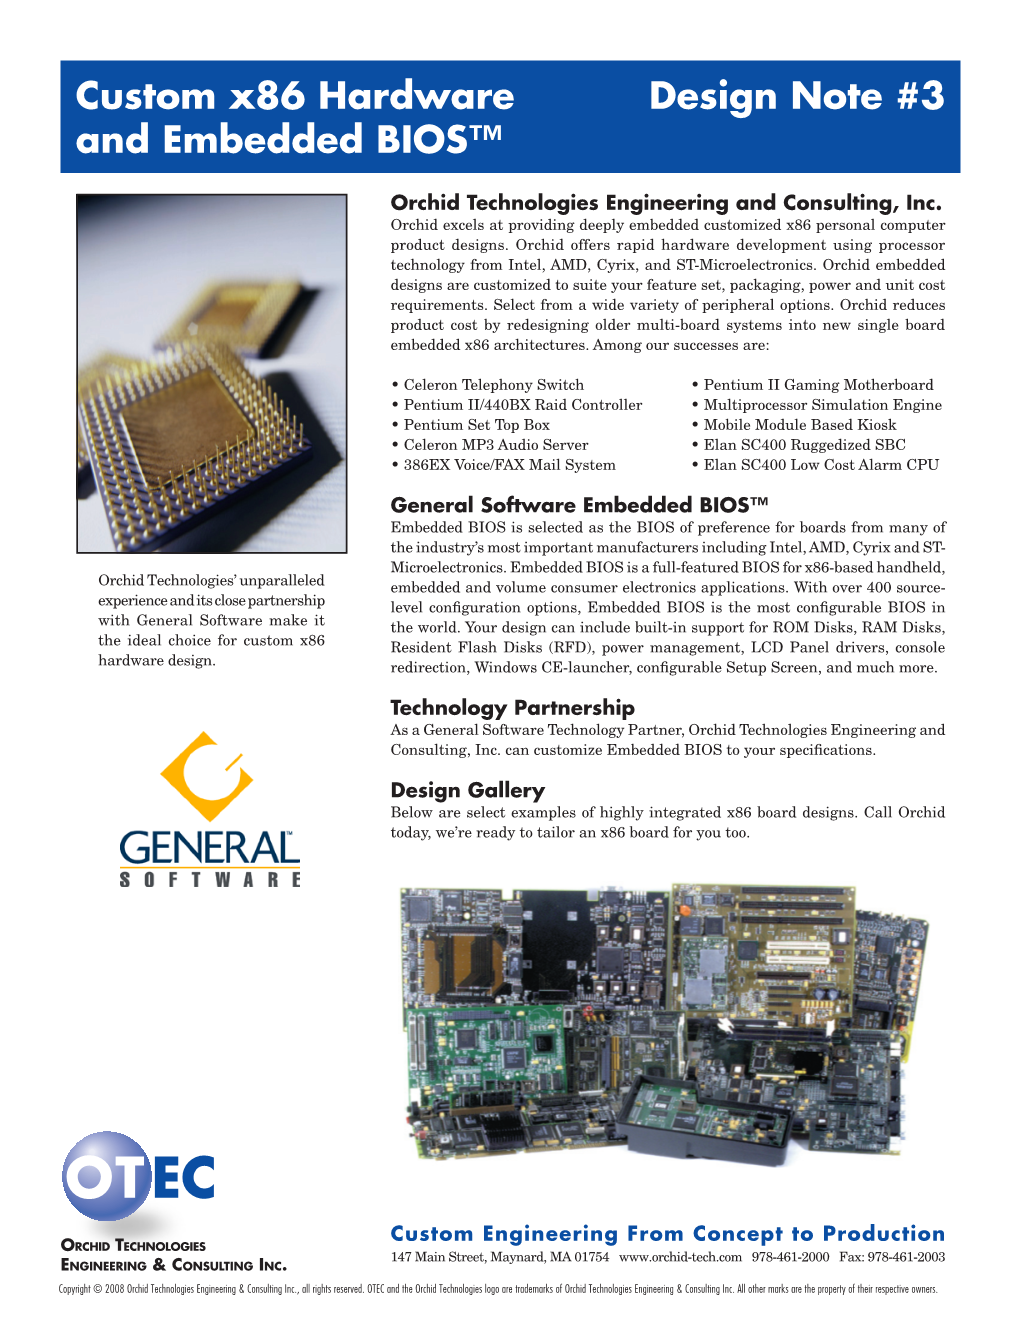 Custom X86 Hardware and Embedded BIOS™ Design Note #3